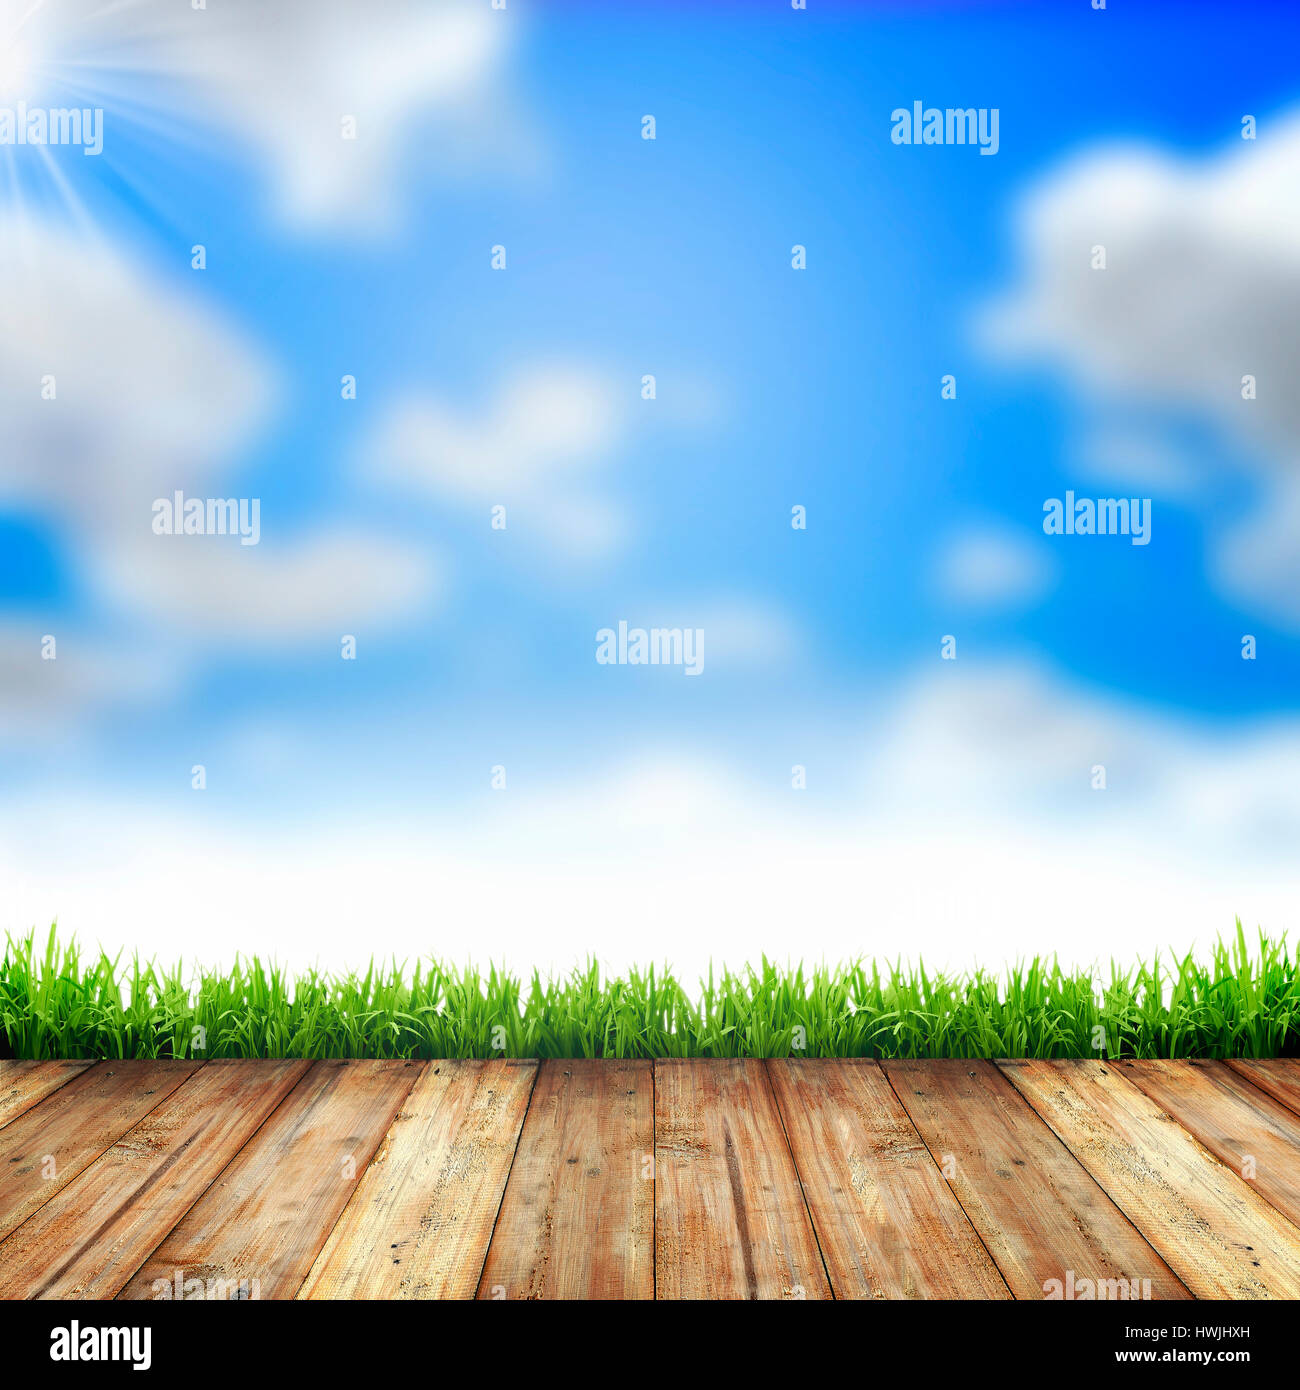 Wooden floor with green grass and blue sky background Stock Photo - Alamy